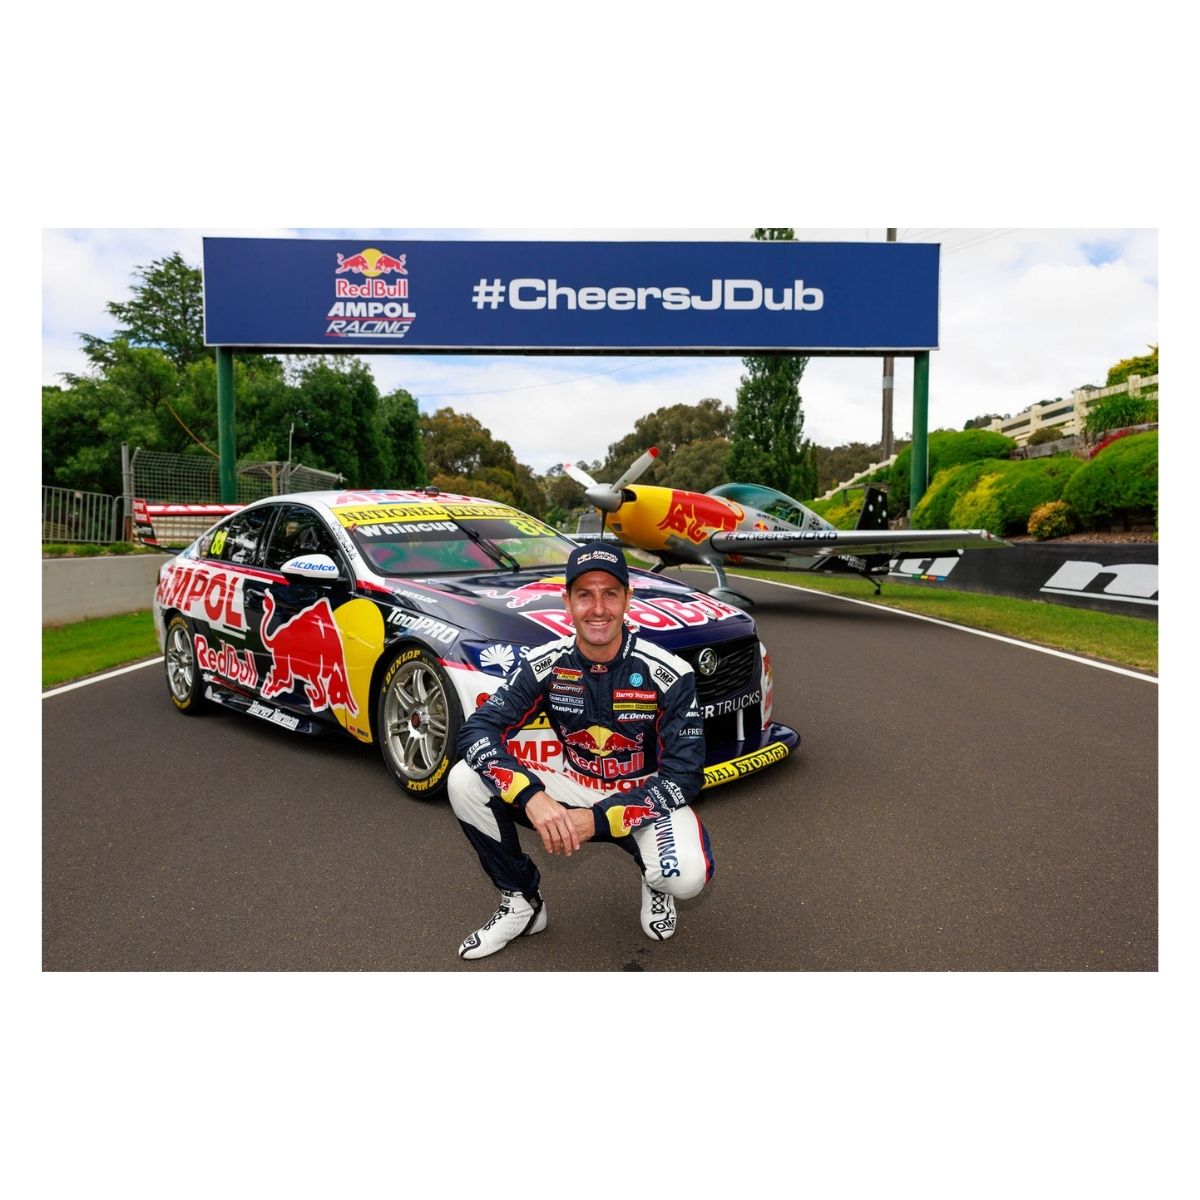 Holden ZB Commodore - Red Bull Ampol Racing - Whincup/Lowndes #88 - Repco Bathurst 1000